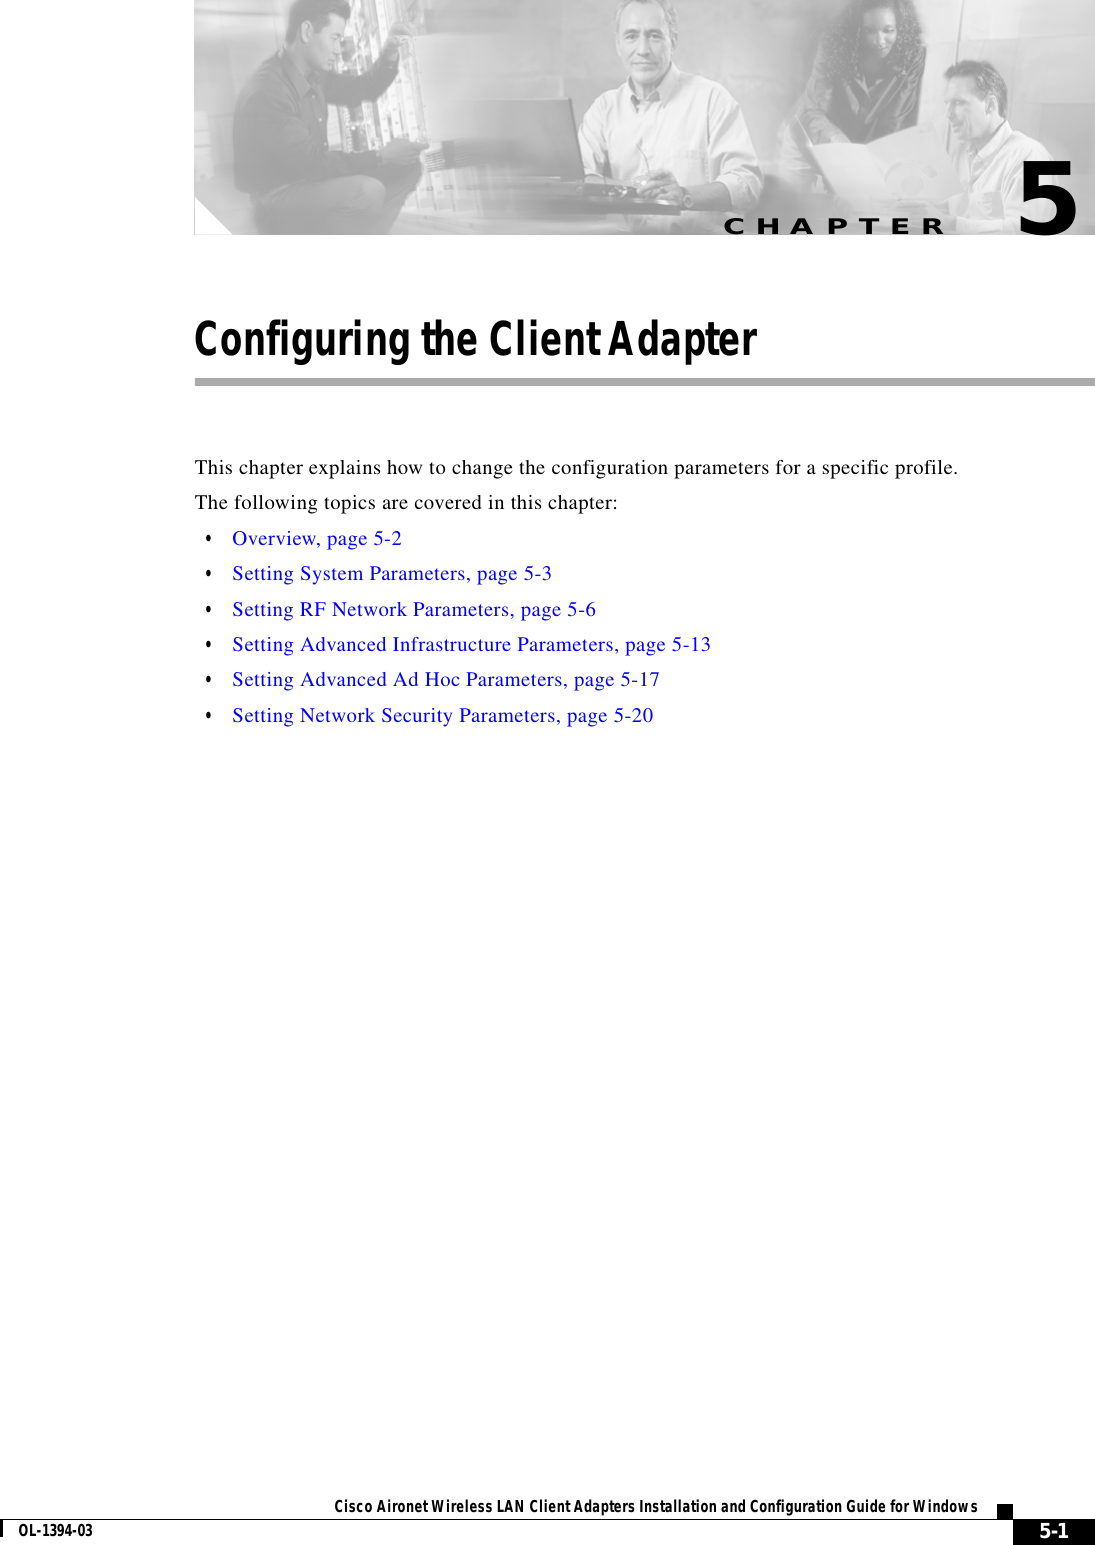 CHAPTER5-1Cisco Aironet Wireless LAN Client Adapters Installation and Configuration Guide for WindowsOL-1394-035Configuring the Client AdapterThis chapter explains how to change the configuration parameters for a specific profile.The following topics are covered in this chapter:•Overview, page 5-2•Setting System Parameters, page 5-3•Setting RF Network Parameters, page 5-6•Setting Advanced Infrastructure Parameters, page 5-13•Setting Advanced Ad Hoc Parameters, page 5-17•Setting Network Security Parameters, page 5-20